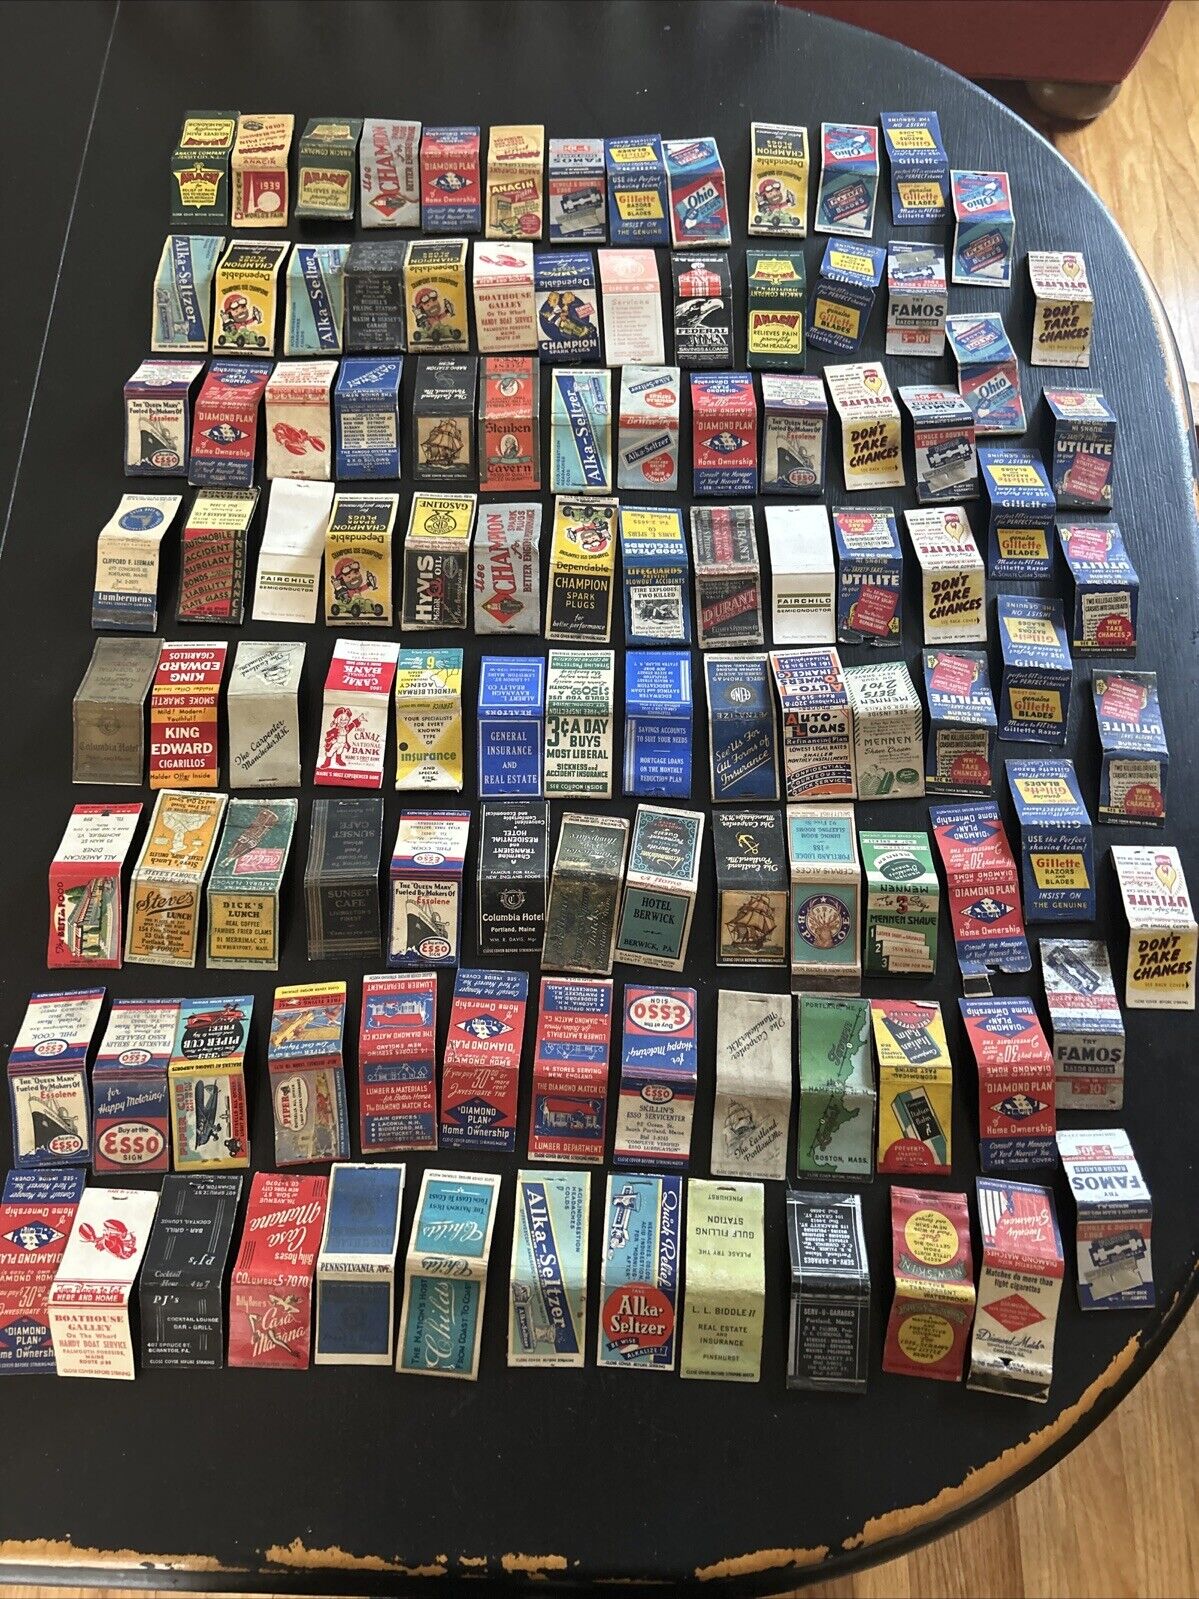 LOT OF 100+ VTG Empty Matchbook Covers 1930’s-1950’s